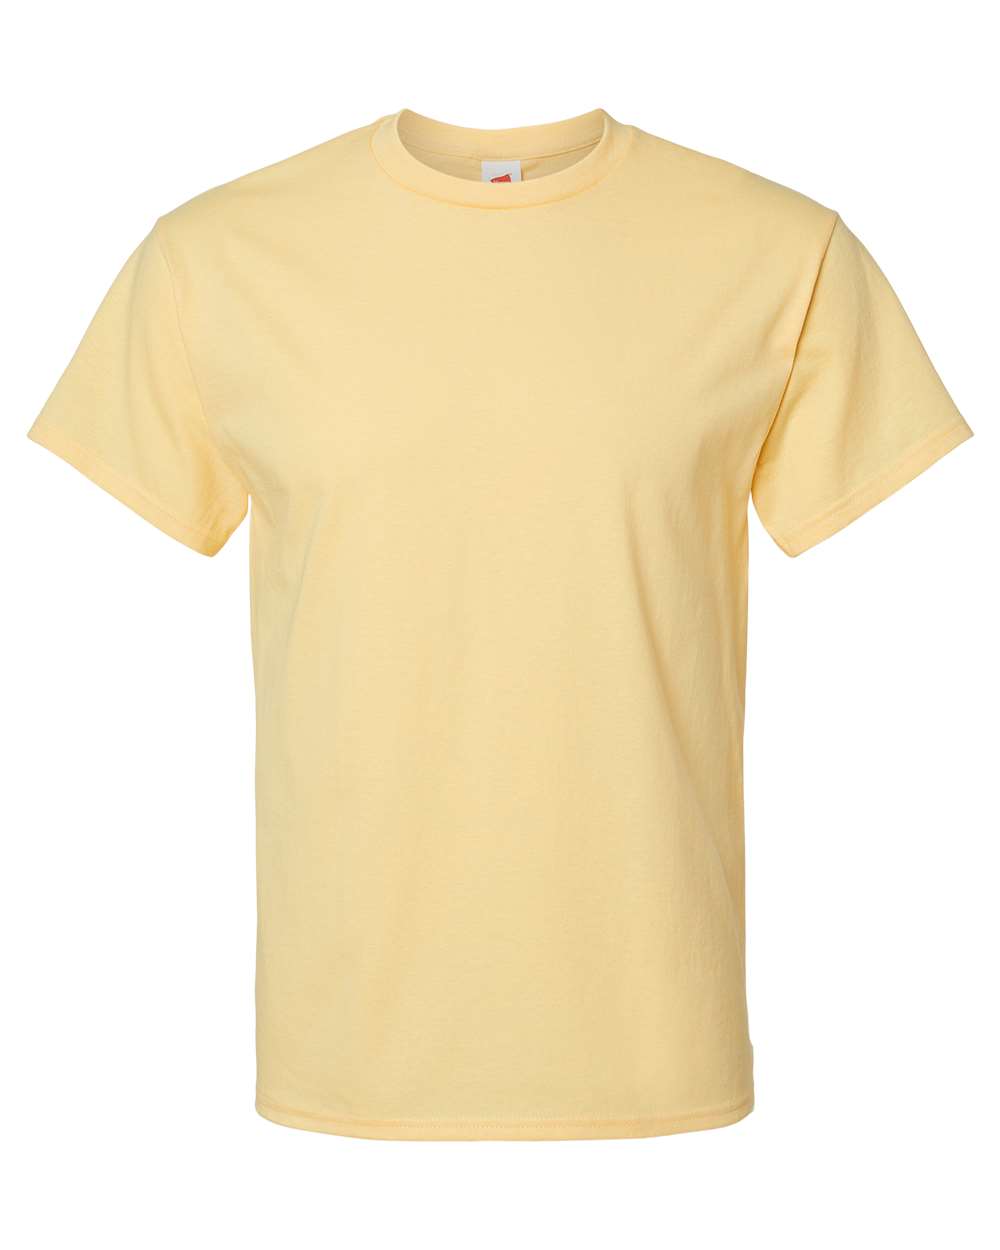 Essential-T T-Shirt Child Product 1